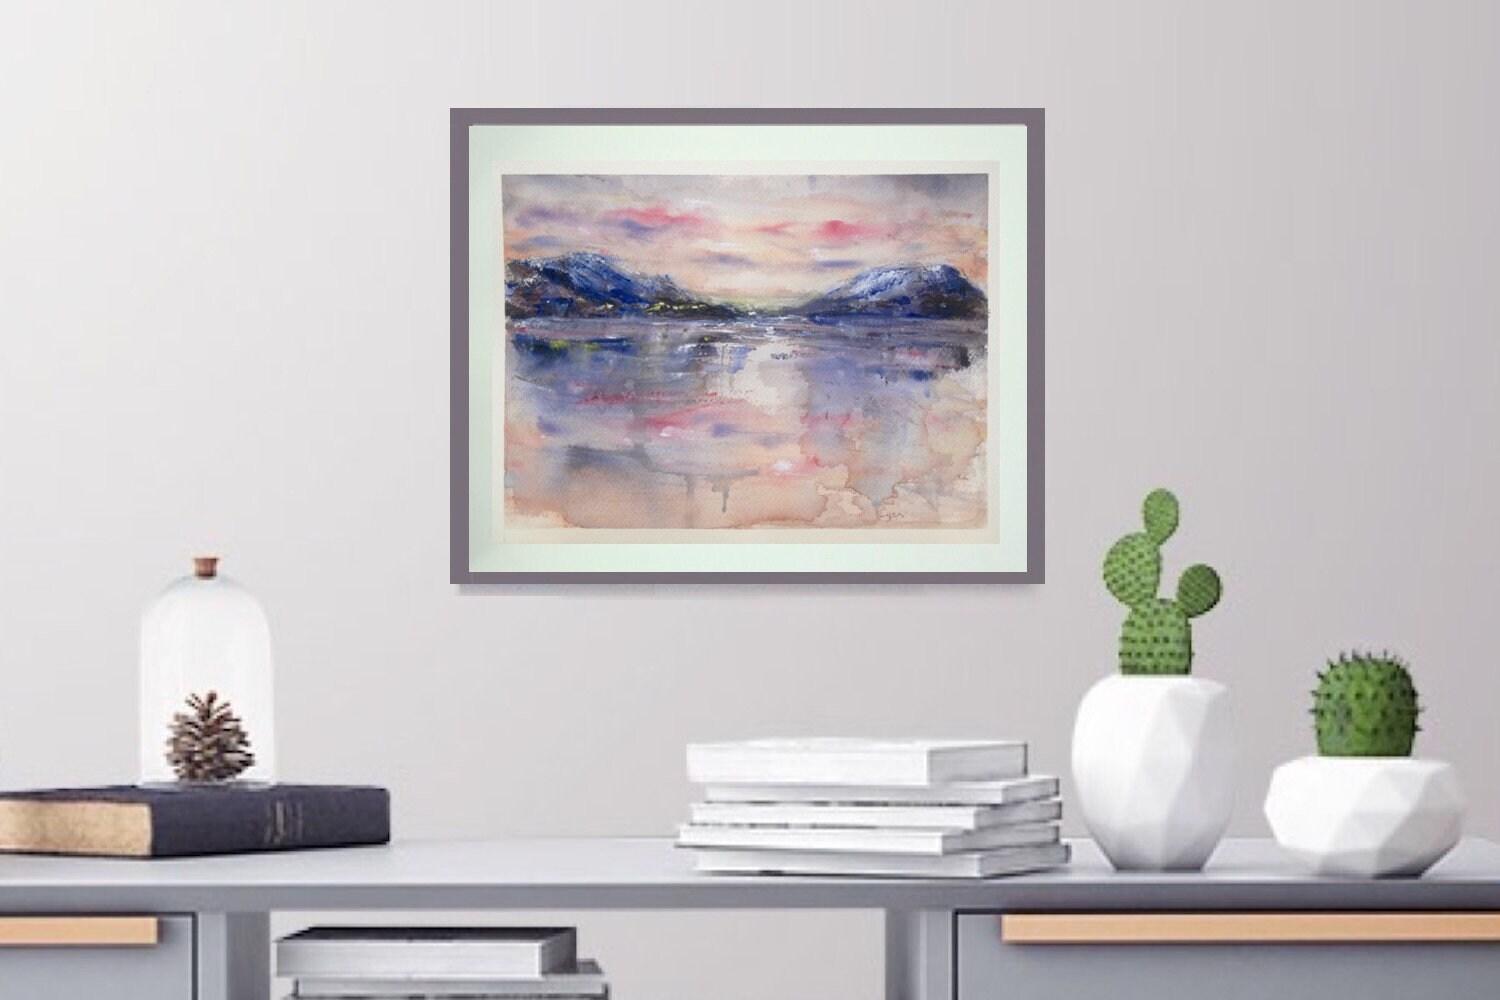 Dreamcatcher - Icelandic sunset abstract landscape watercolor painting art of Iceland Akureyri with snow mountains coastal water reflections